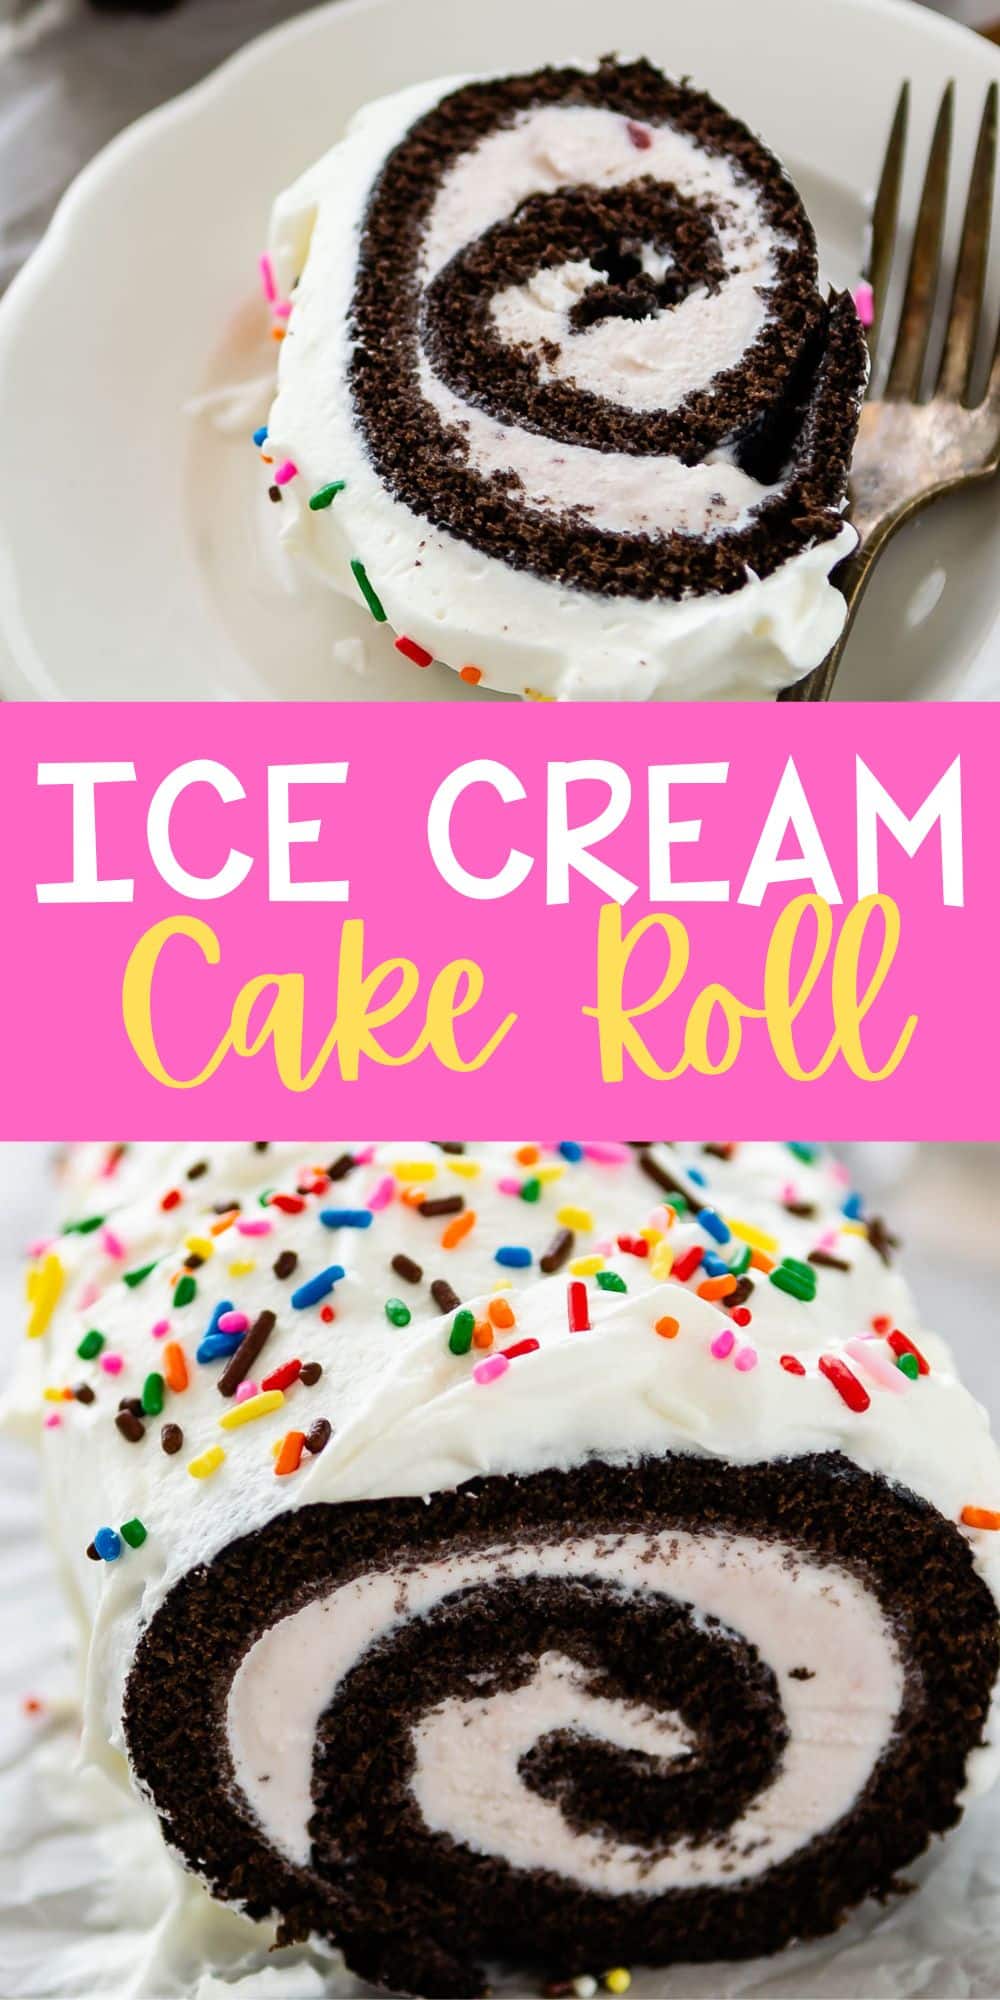 two photos of chocolate cake roll covered in white frosting and colorful sprinkles with words on the image.